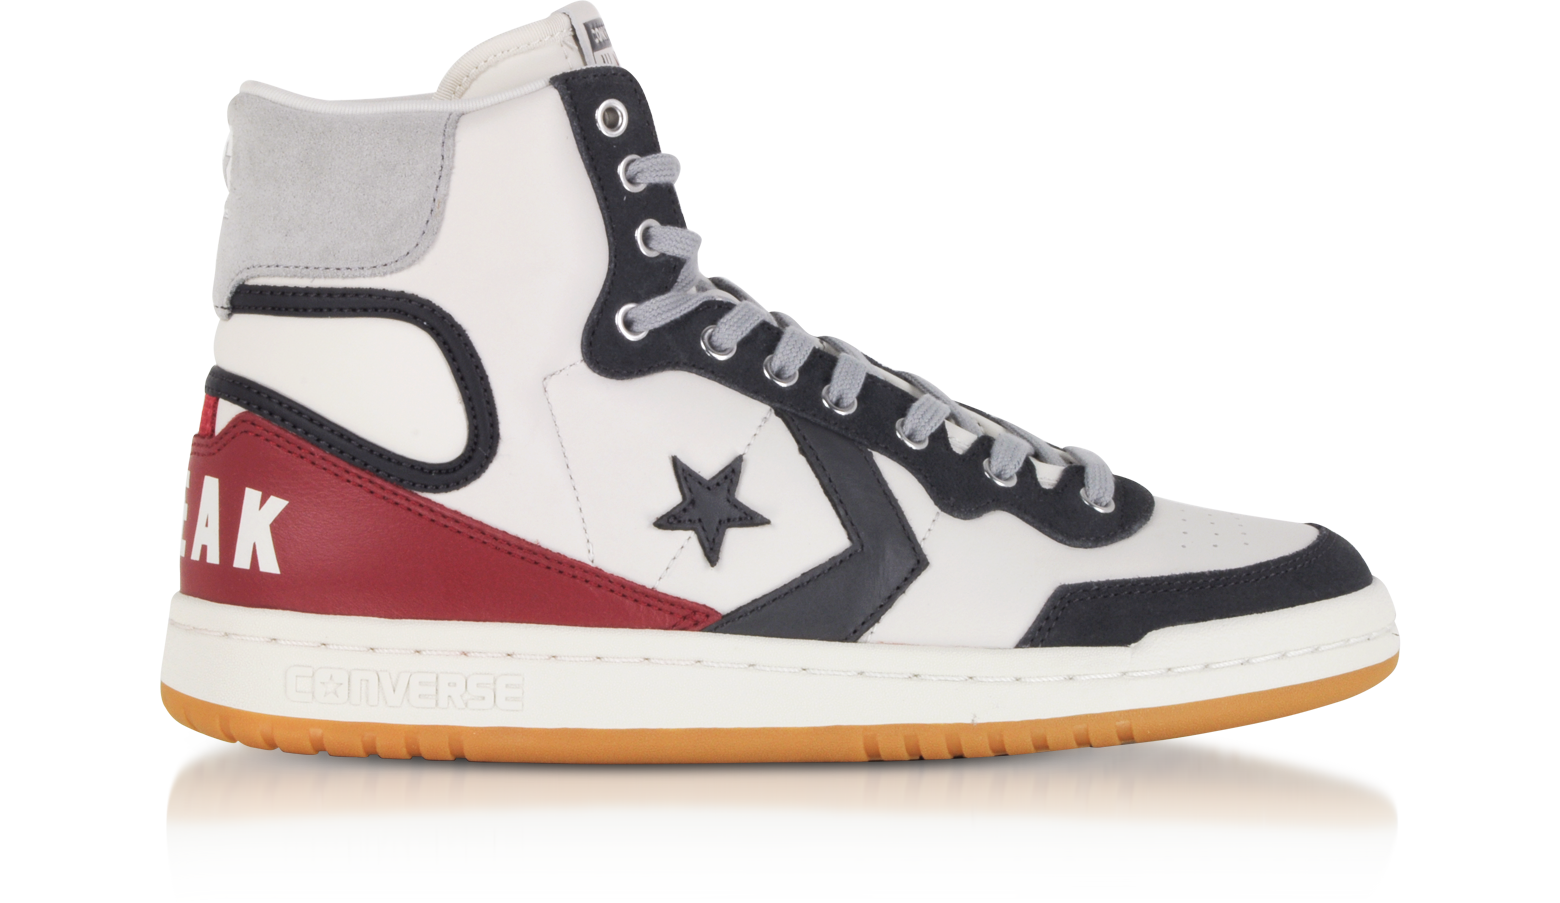 Converse Limited Edition Fastbreak Hi Light Gray and Storm Wind Leather High  Top Men's Sneakers 7 (8.5 WOMENS US | 6 UK | 40 EU) at FORZIERI